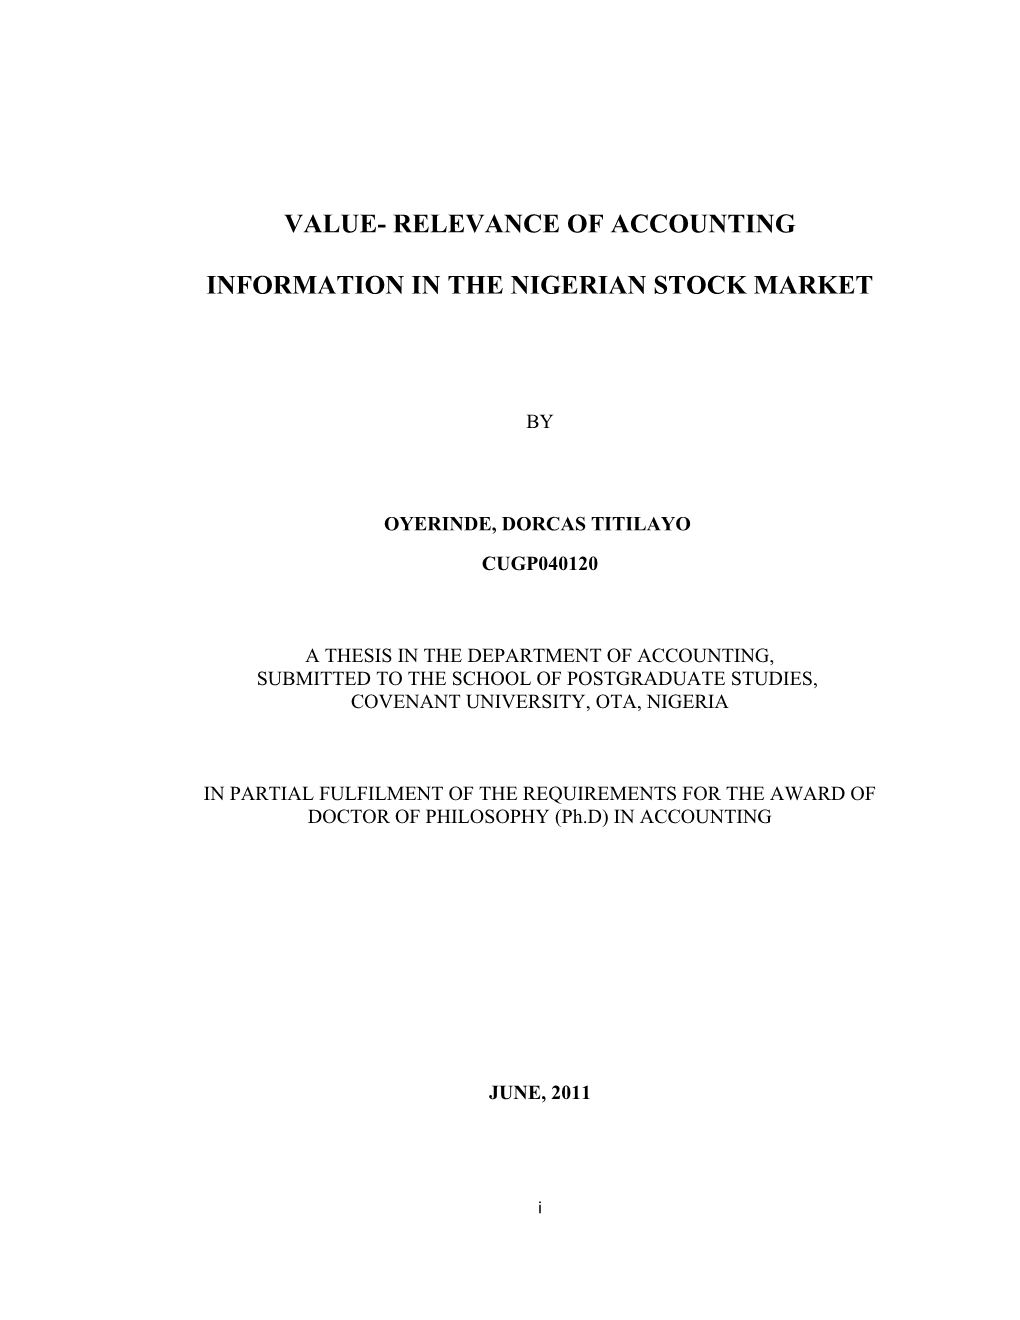 Value- Relevance of Accounting Information in the Nigerian Stock Market